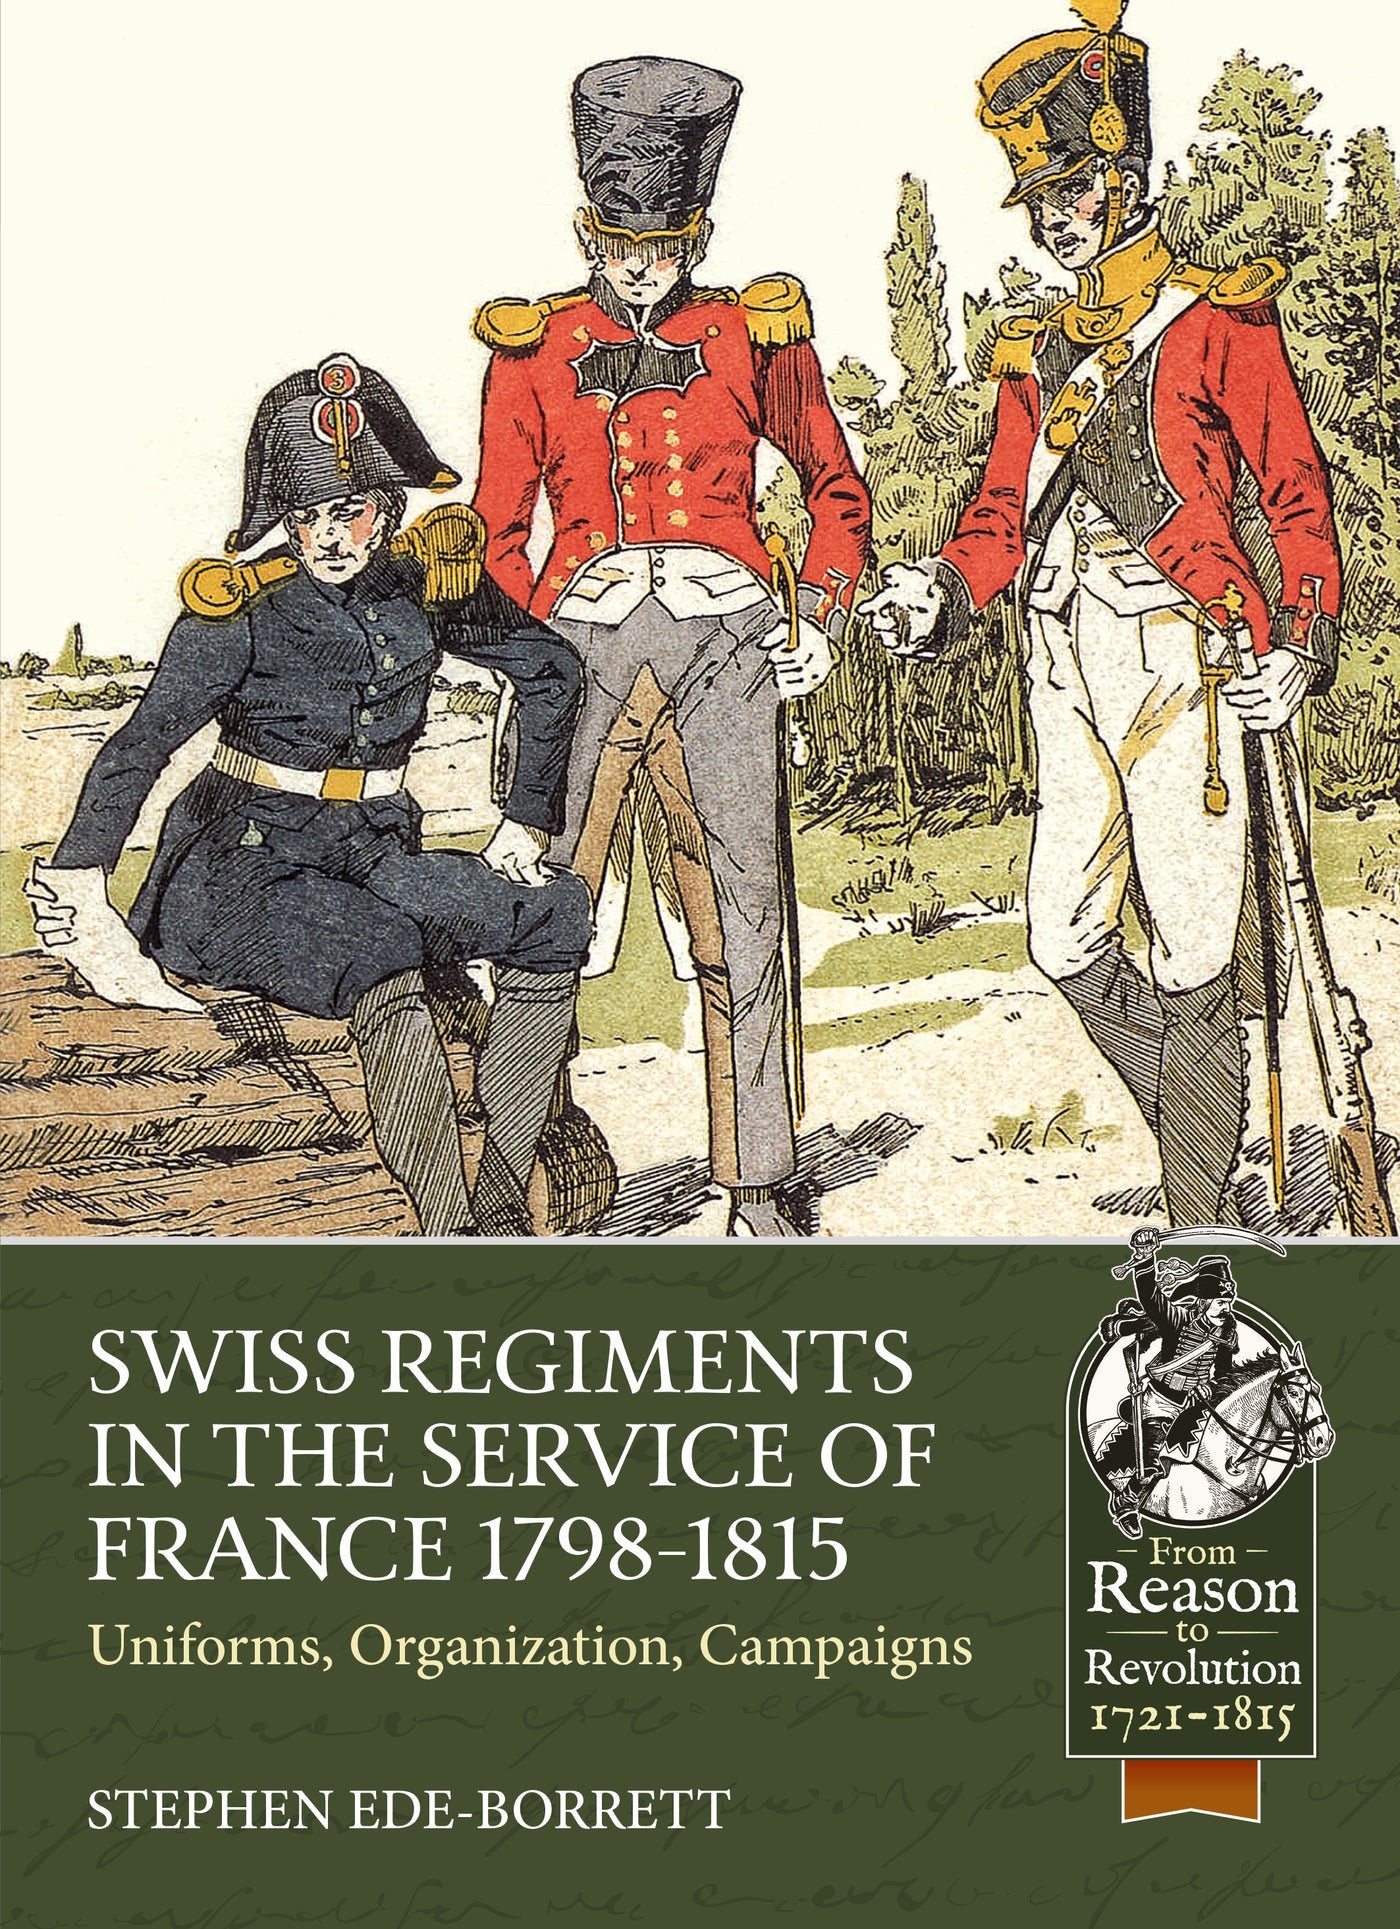 Swiss Regiments in the Service of France 1798-1815